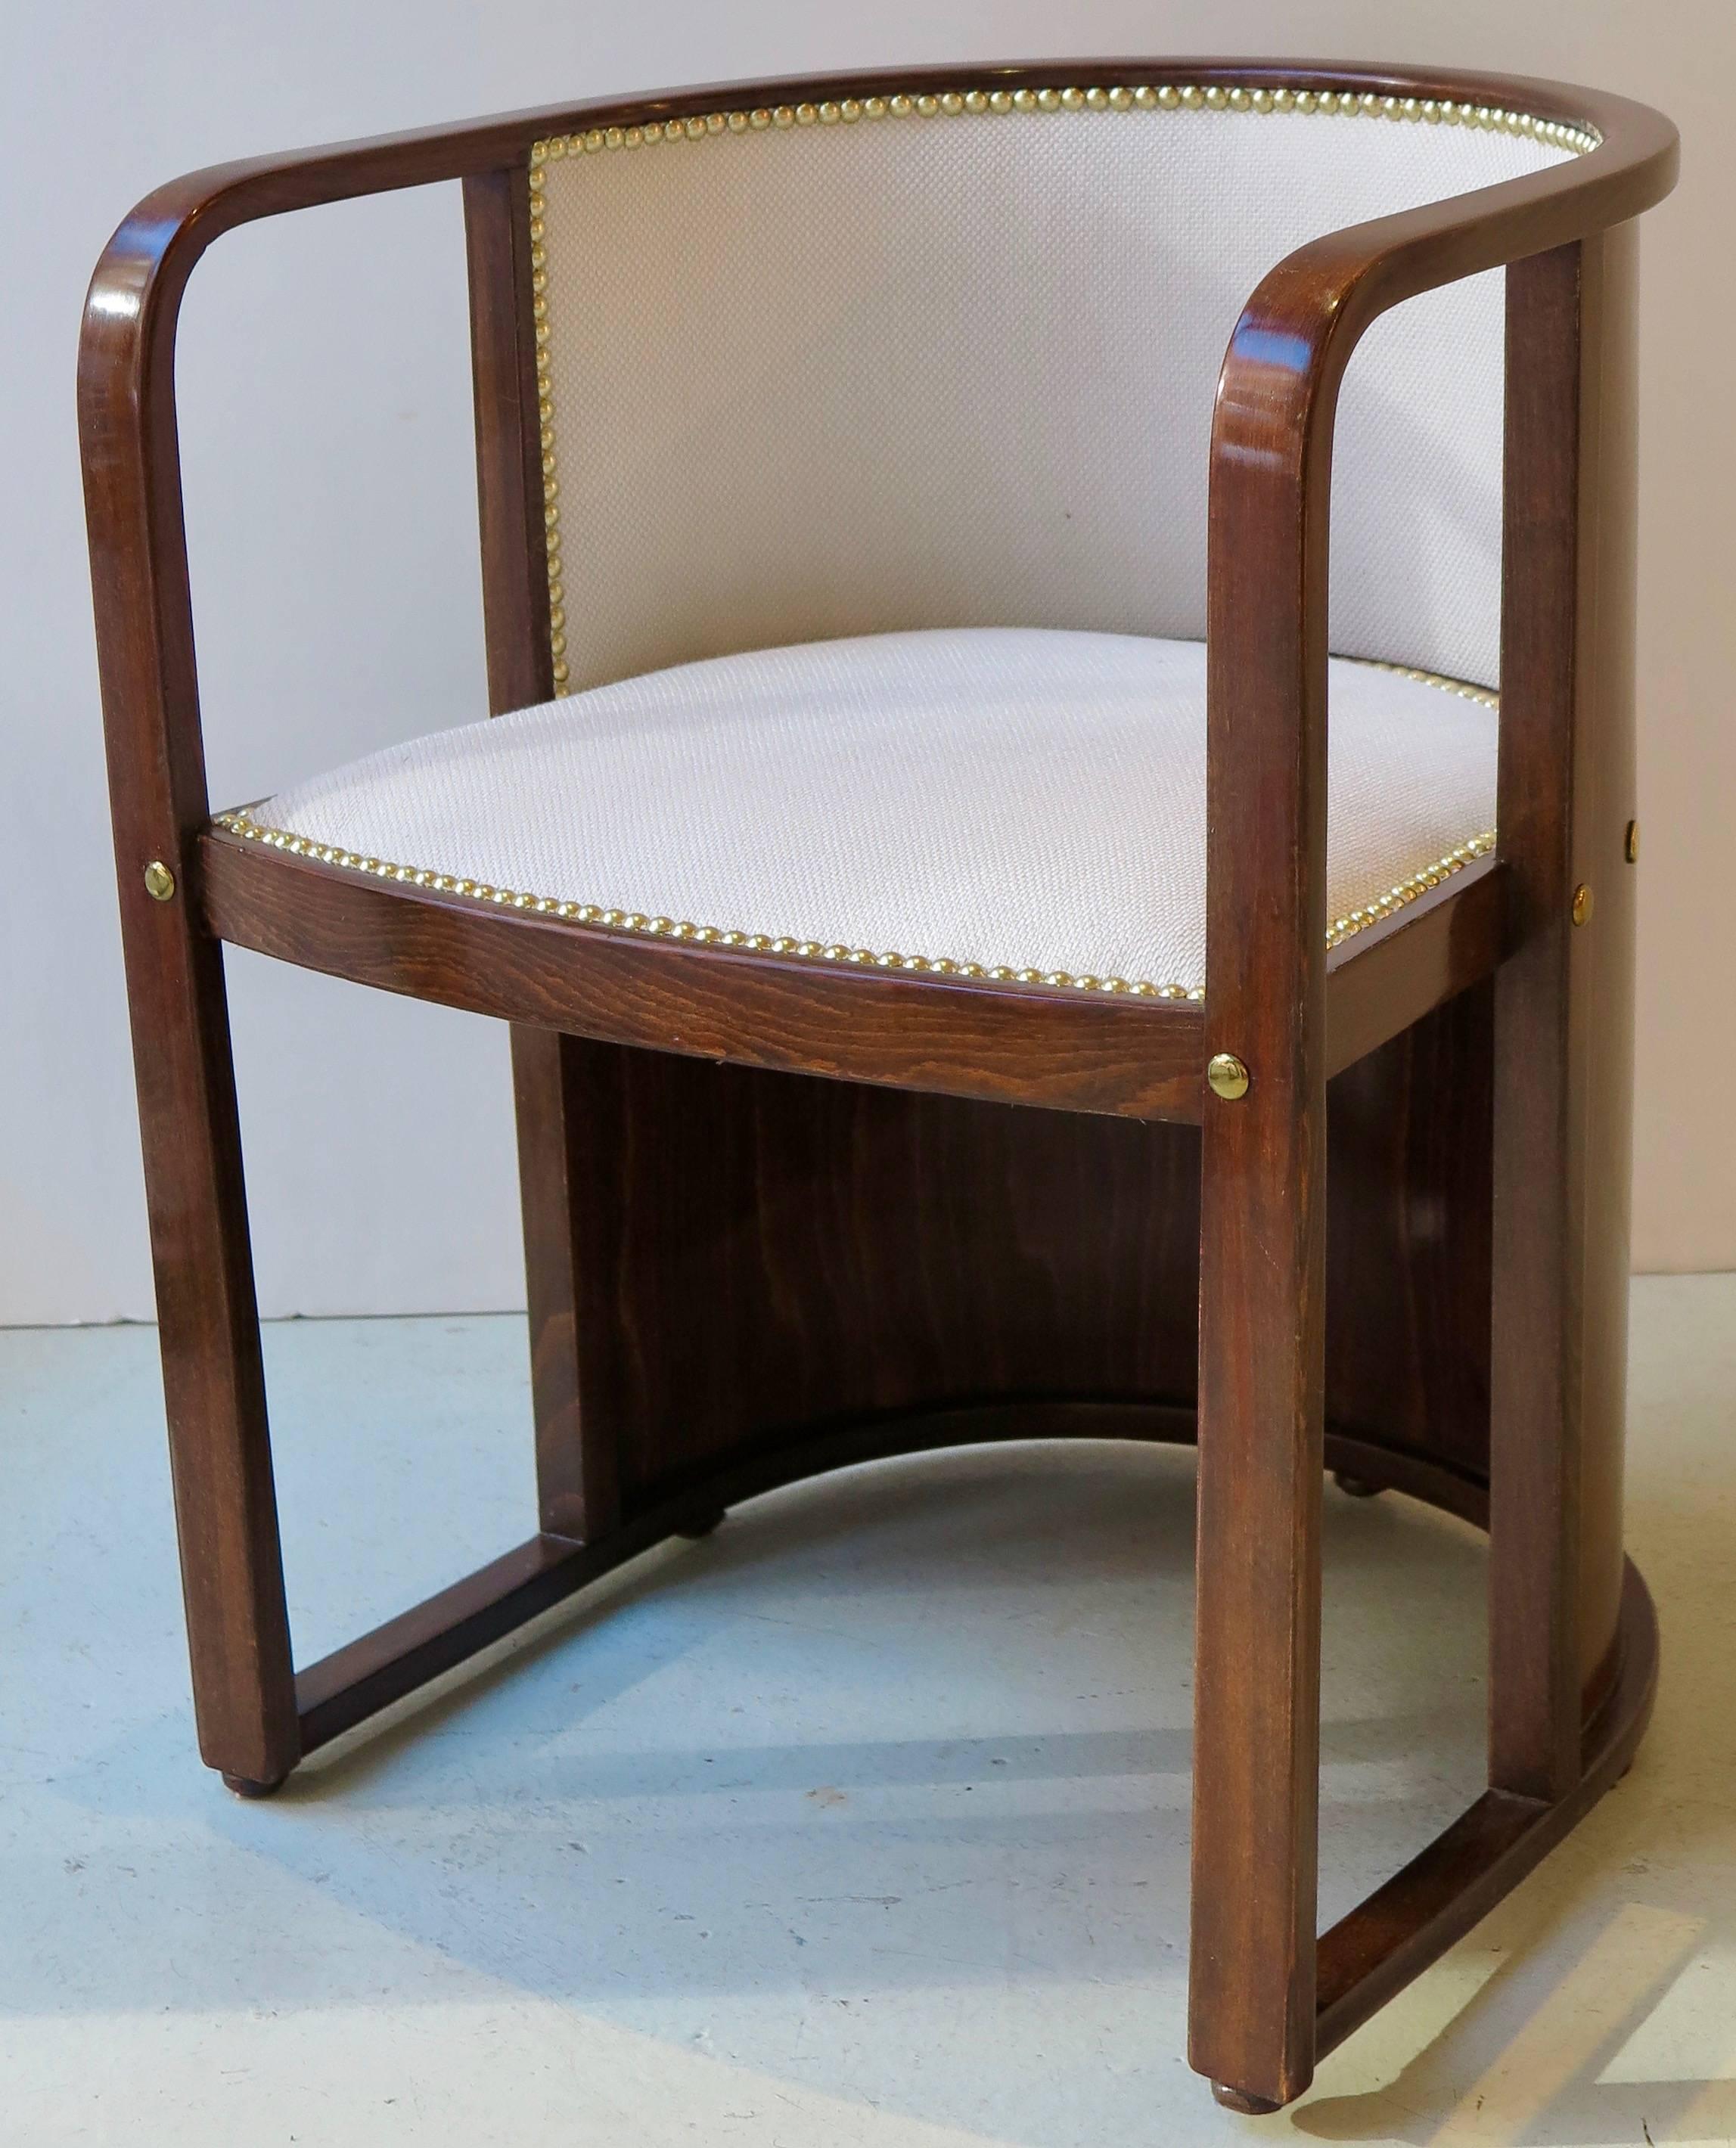 Pair of Vienna secession armchairs, model 421, in mahogany stained beechwood with brass nails on back of the chairs by Josef Hoffmann, produced by J. & J. Kohn, Austria, circa 1907.